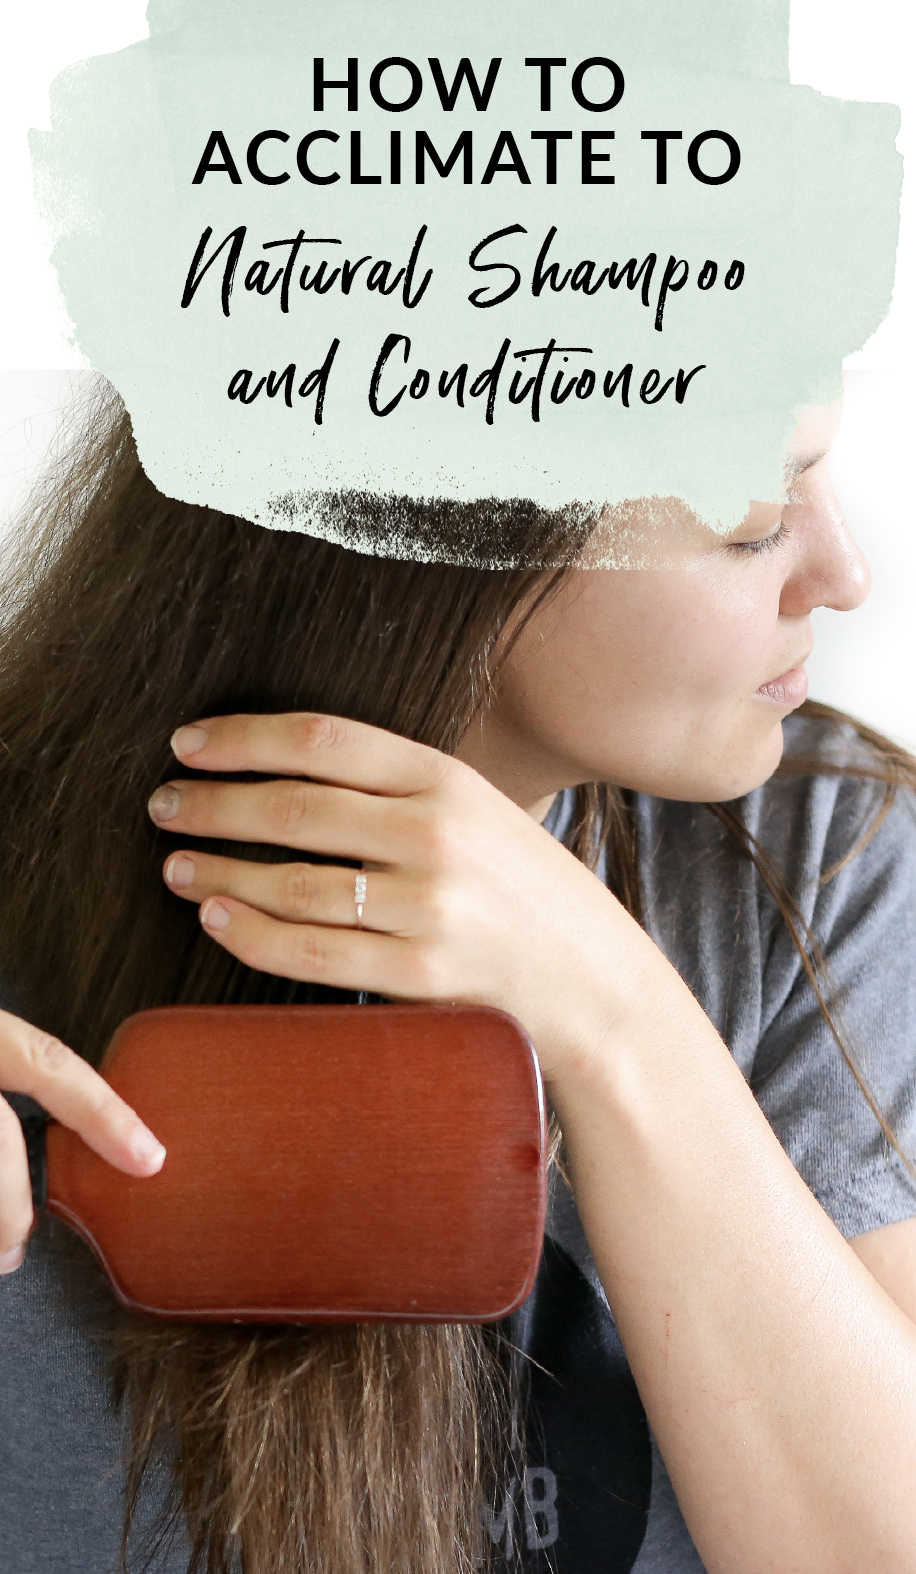 How to get natural shampoo and conditioner to work for your hair